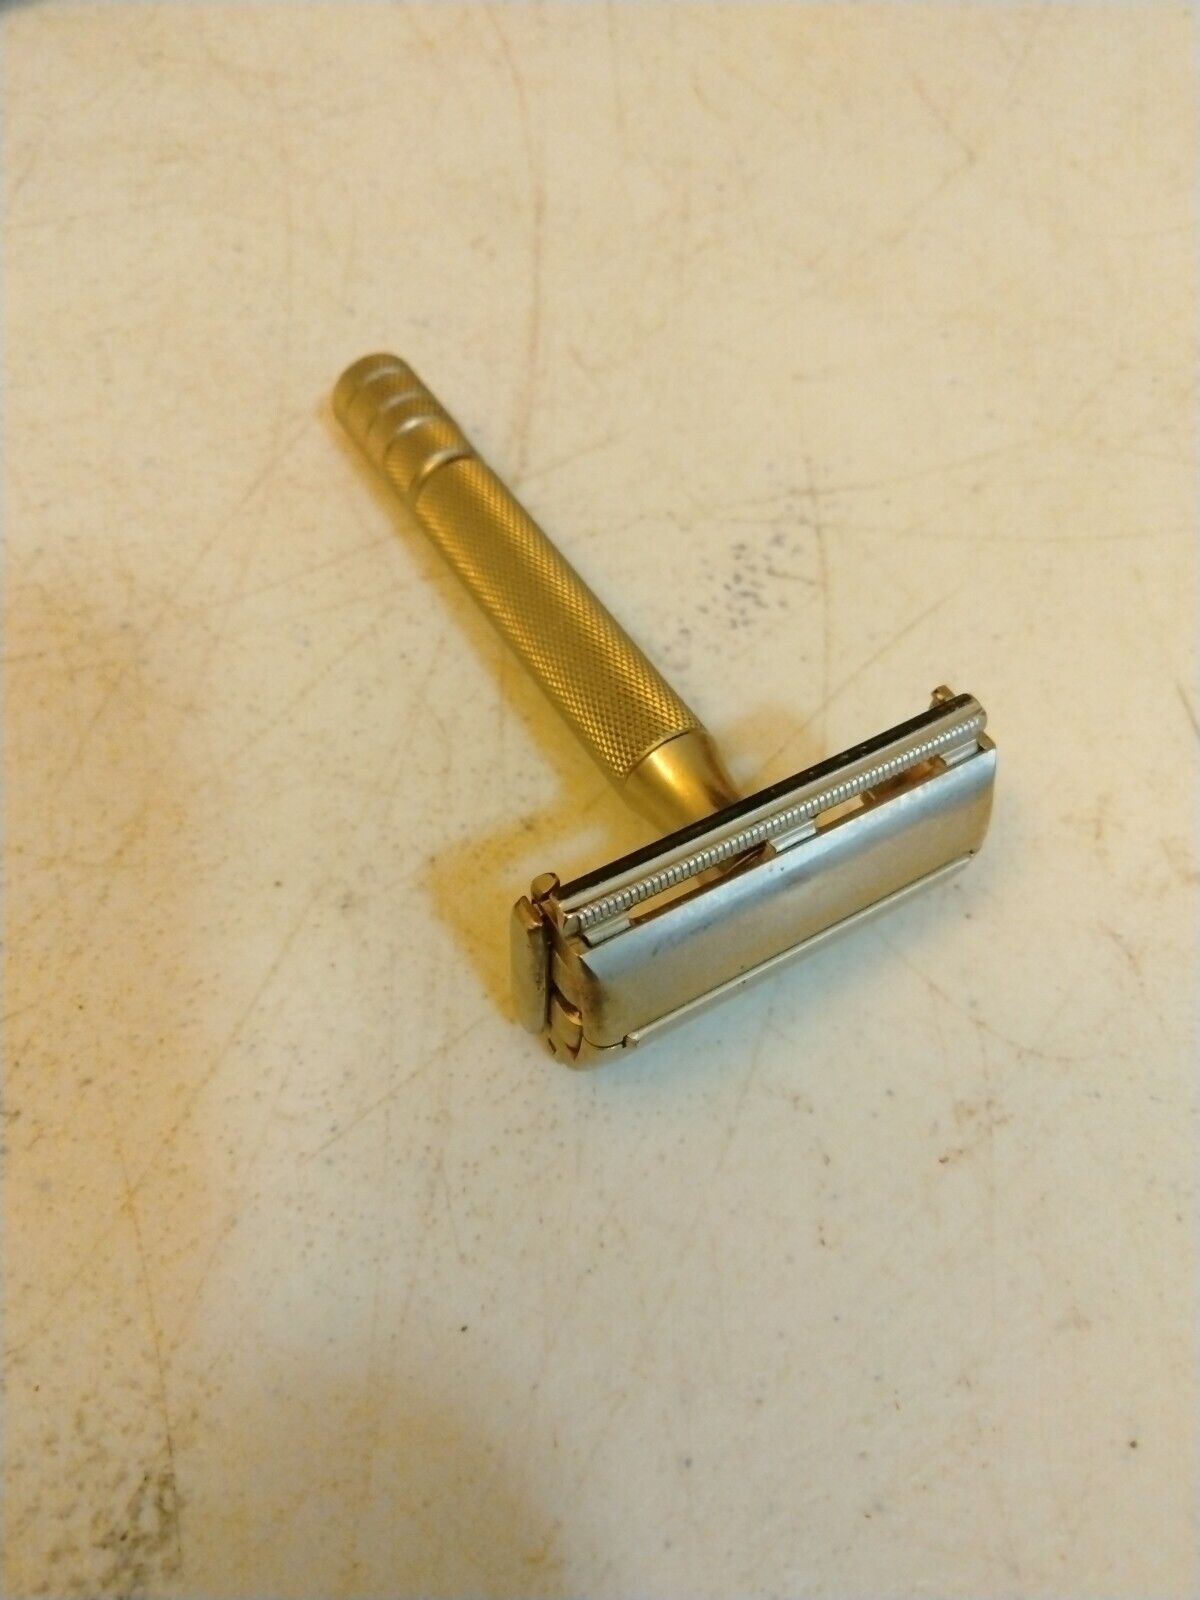 Vintage Gillete Men's Safety Razor Made in USA Beard Care Barber Grooming Tool